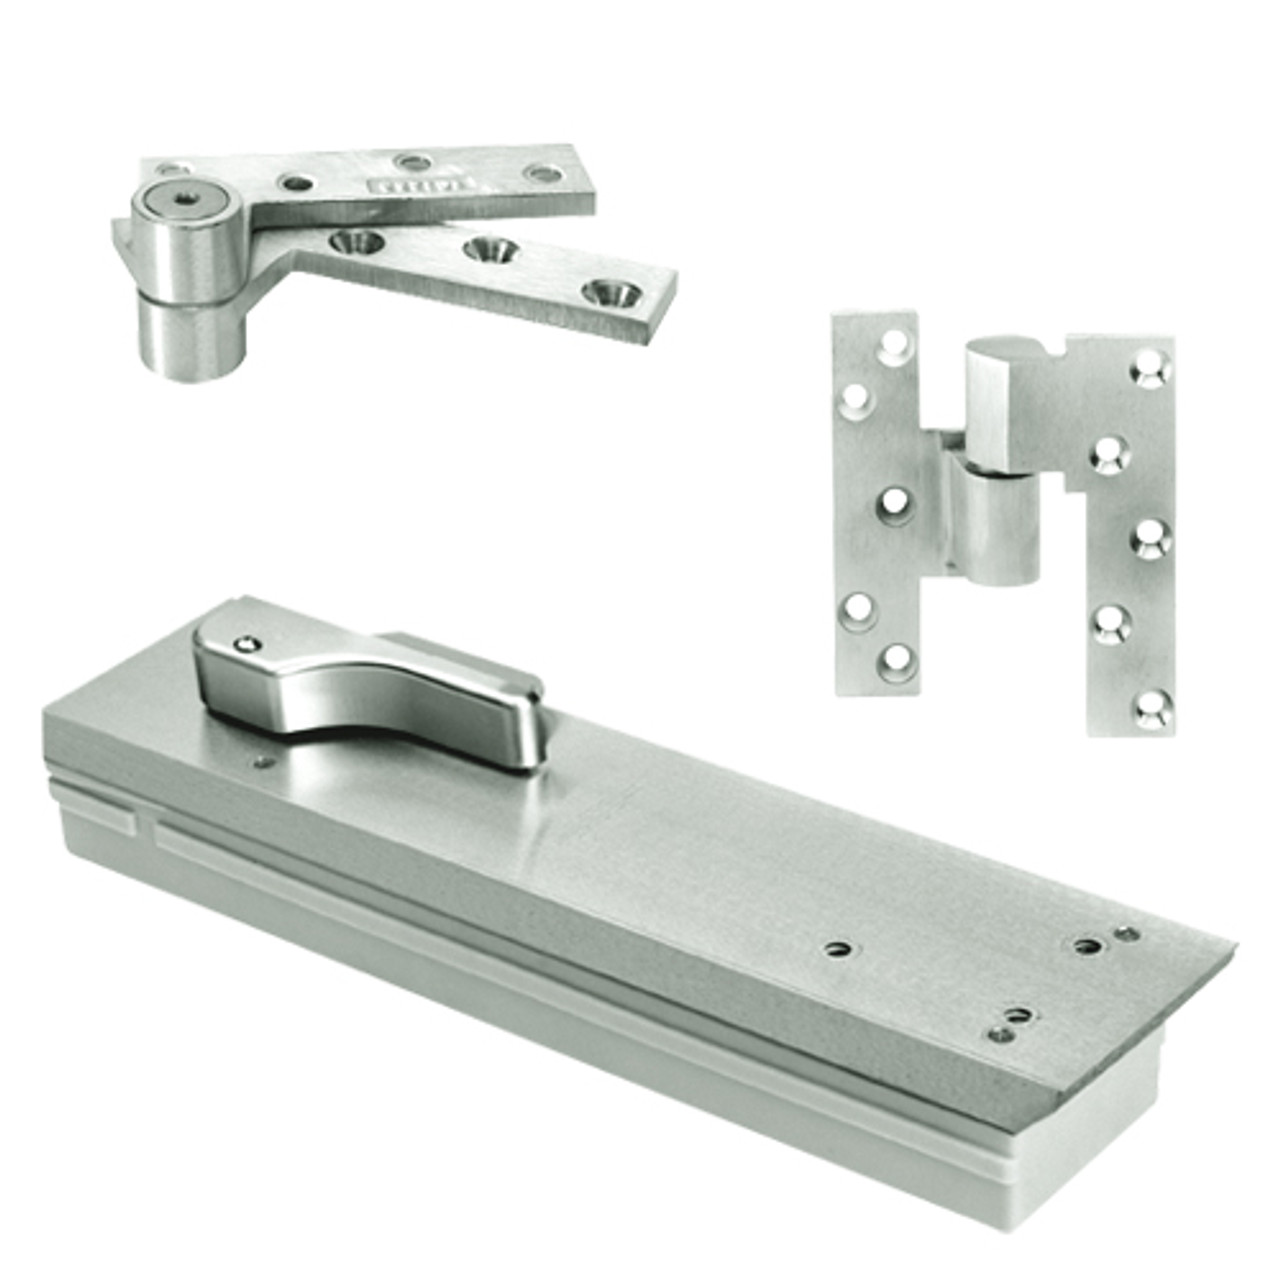 Q5103ABC90-LH-618 Rixson Q51 Series 3/4" Offset Hung Shallow Depth Floor Closers in Bright Nickel Finish